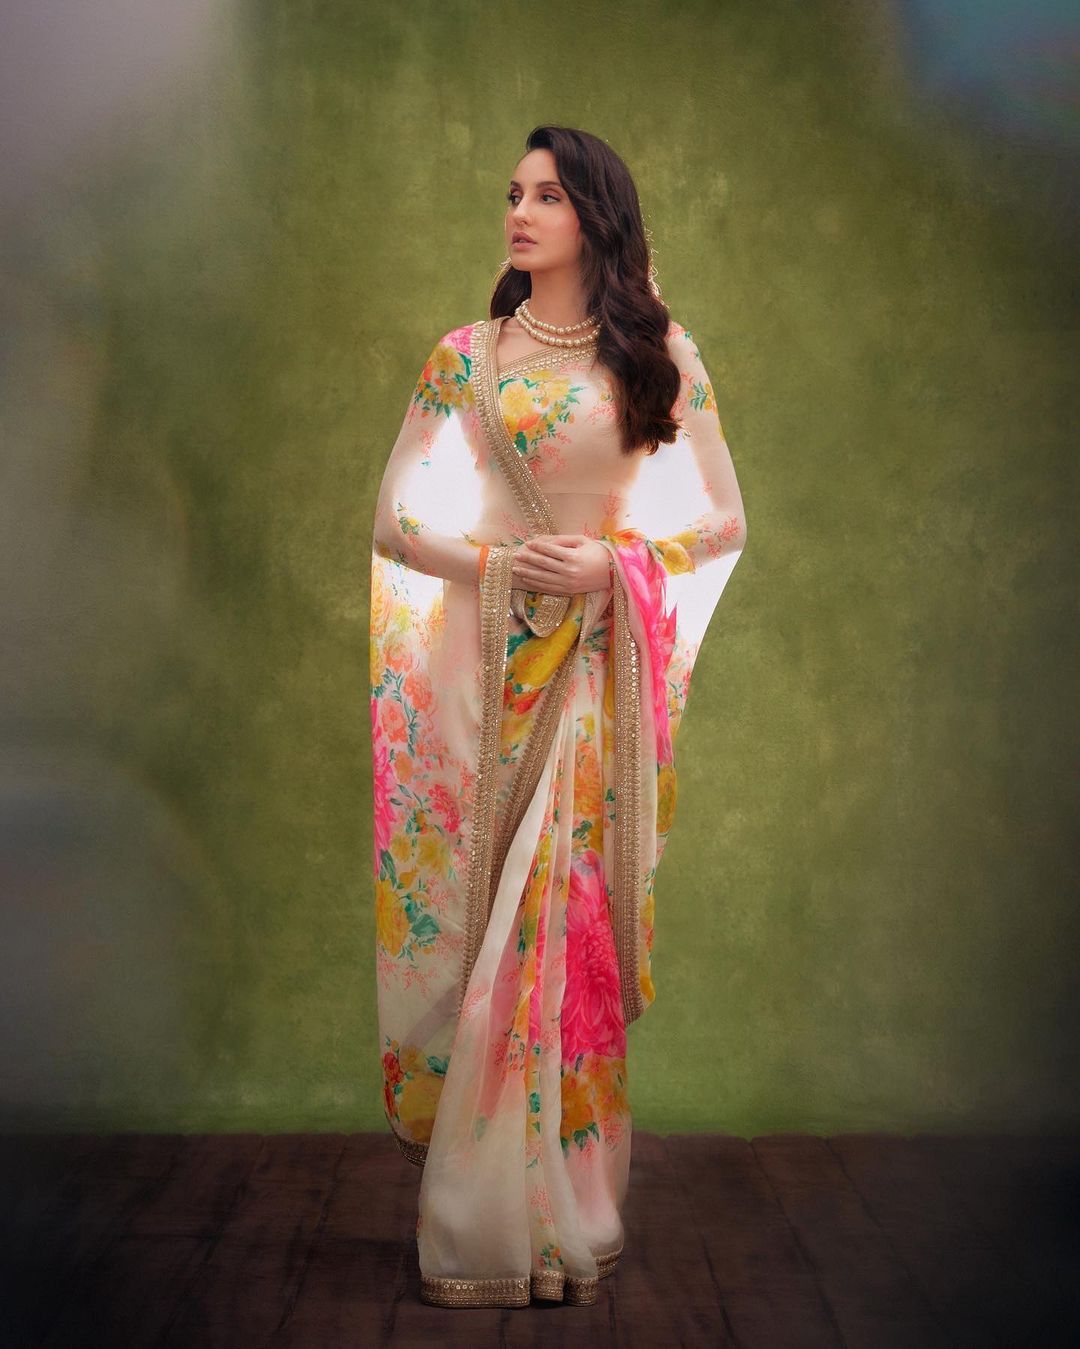 Nora Fatehi's saree looks are extremely graceful and elegant. Scroll ahead to take a look.